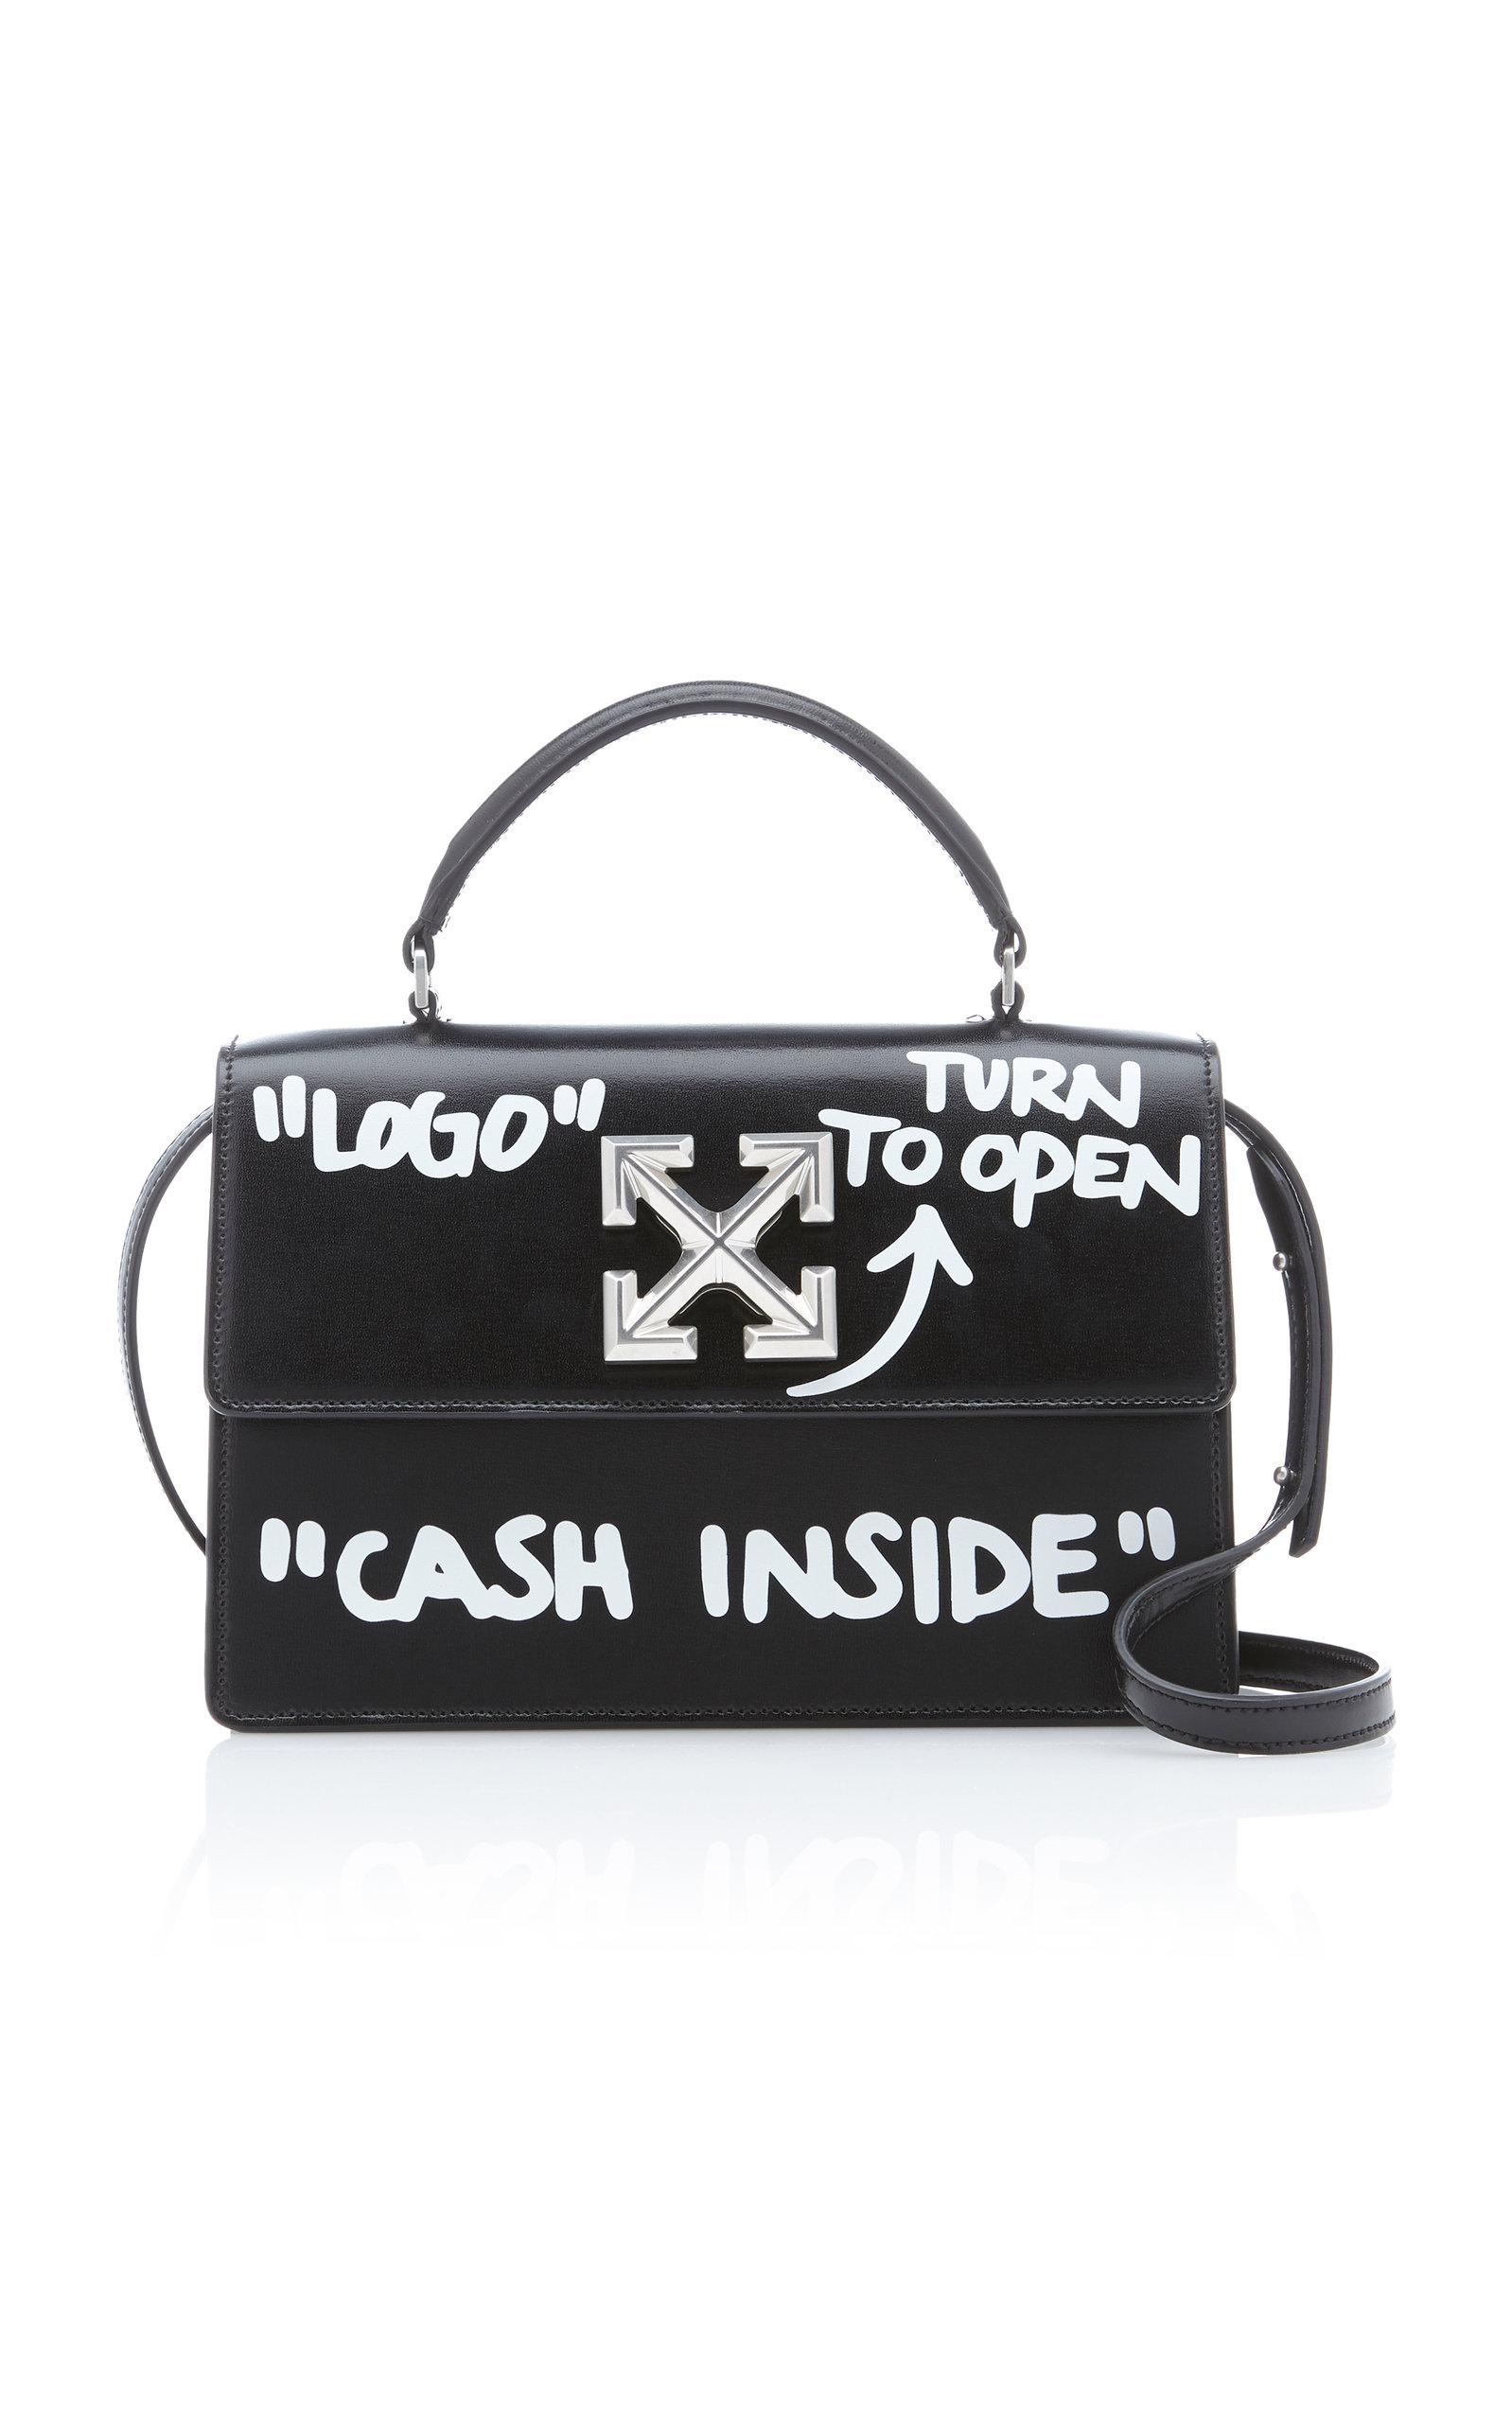 blvckd0pe wearing fw19 women's Off-White™ Jitney bag with CASH INSIDE  text print